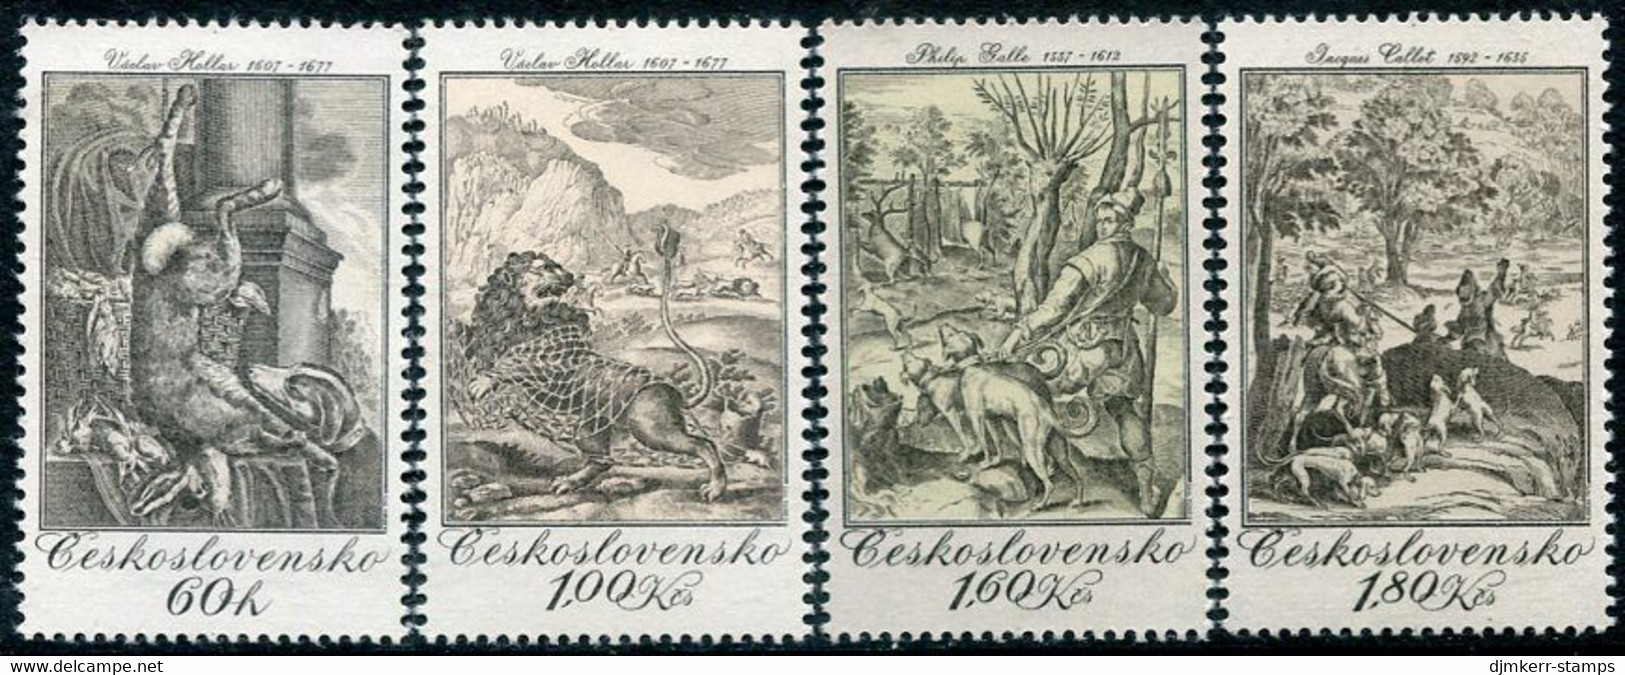 CZECHOSLOVAKIA 1975 Engravings With Hunting Scenes MNH / **. Michel 2240-43 - Unused Stamps